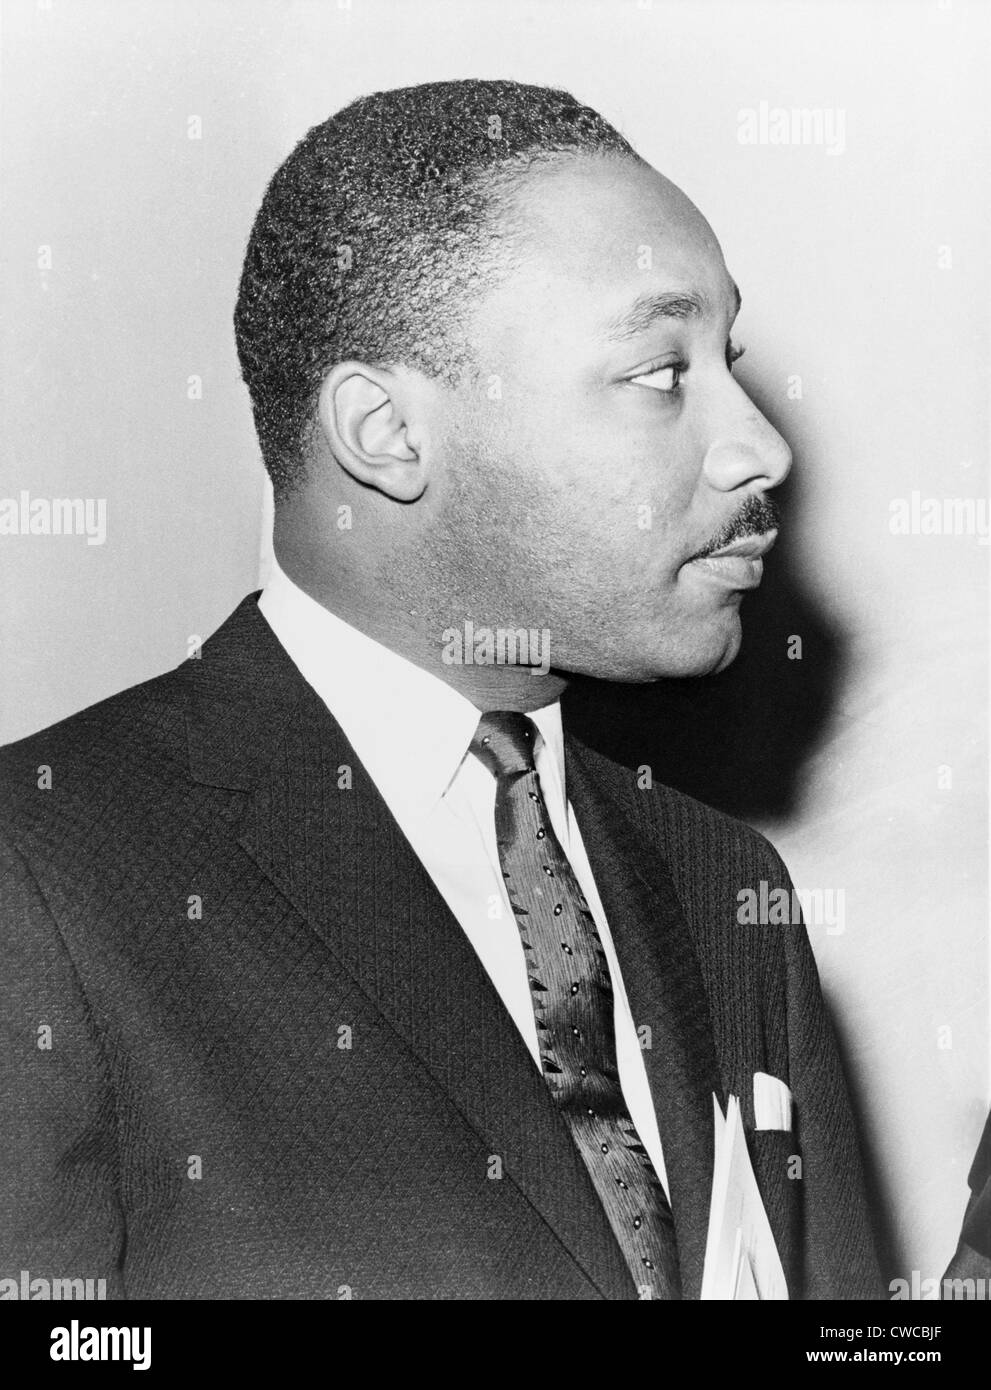 Martin Luther King, Jr. Leader of the Southern Christian Leadership Conference, a Civil Rights Organization. Apr. 27, 1960. Stock Photo